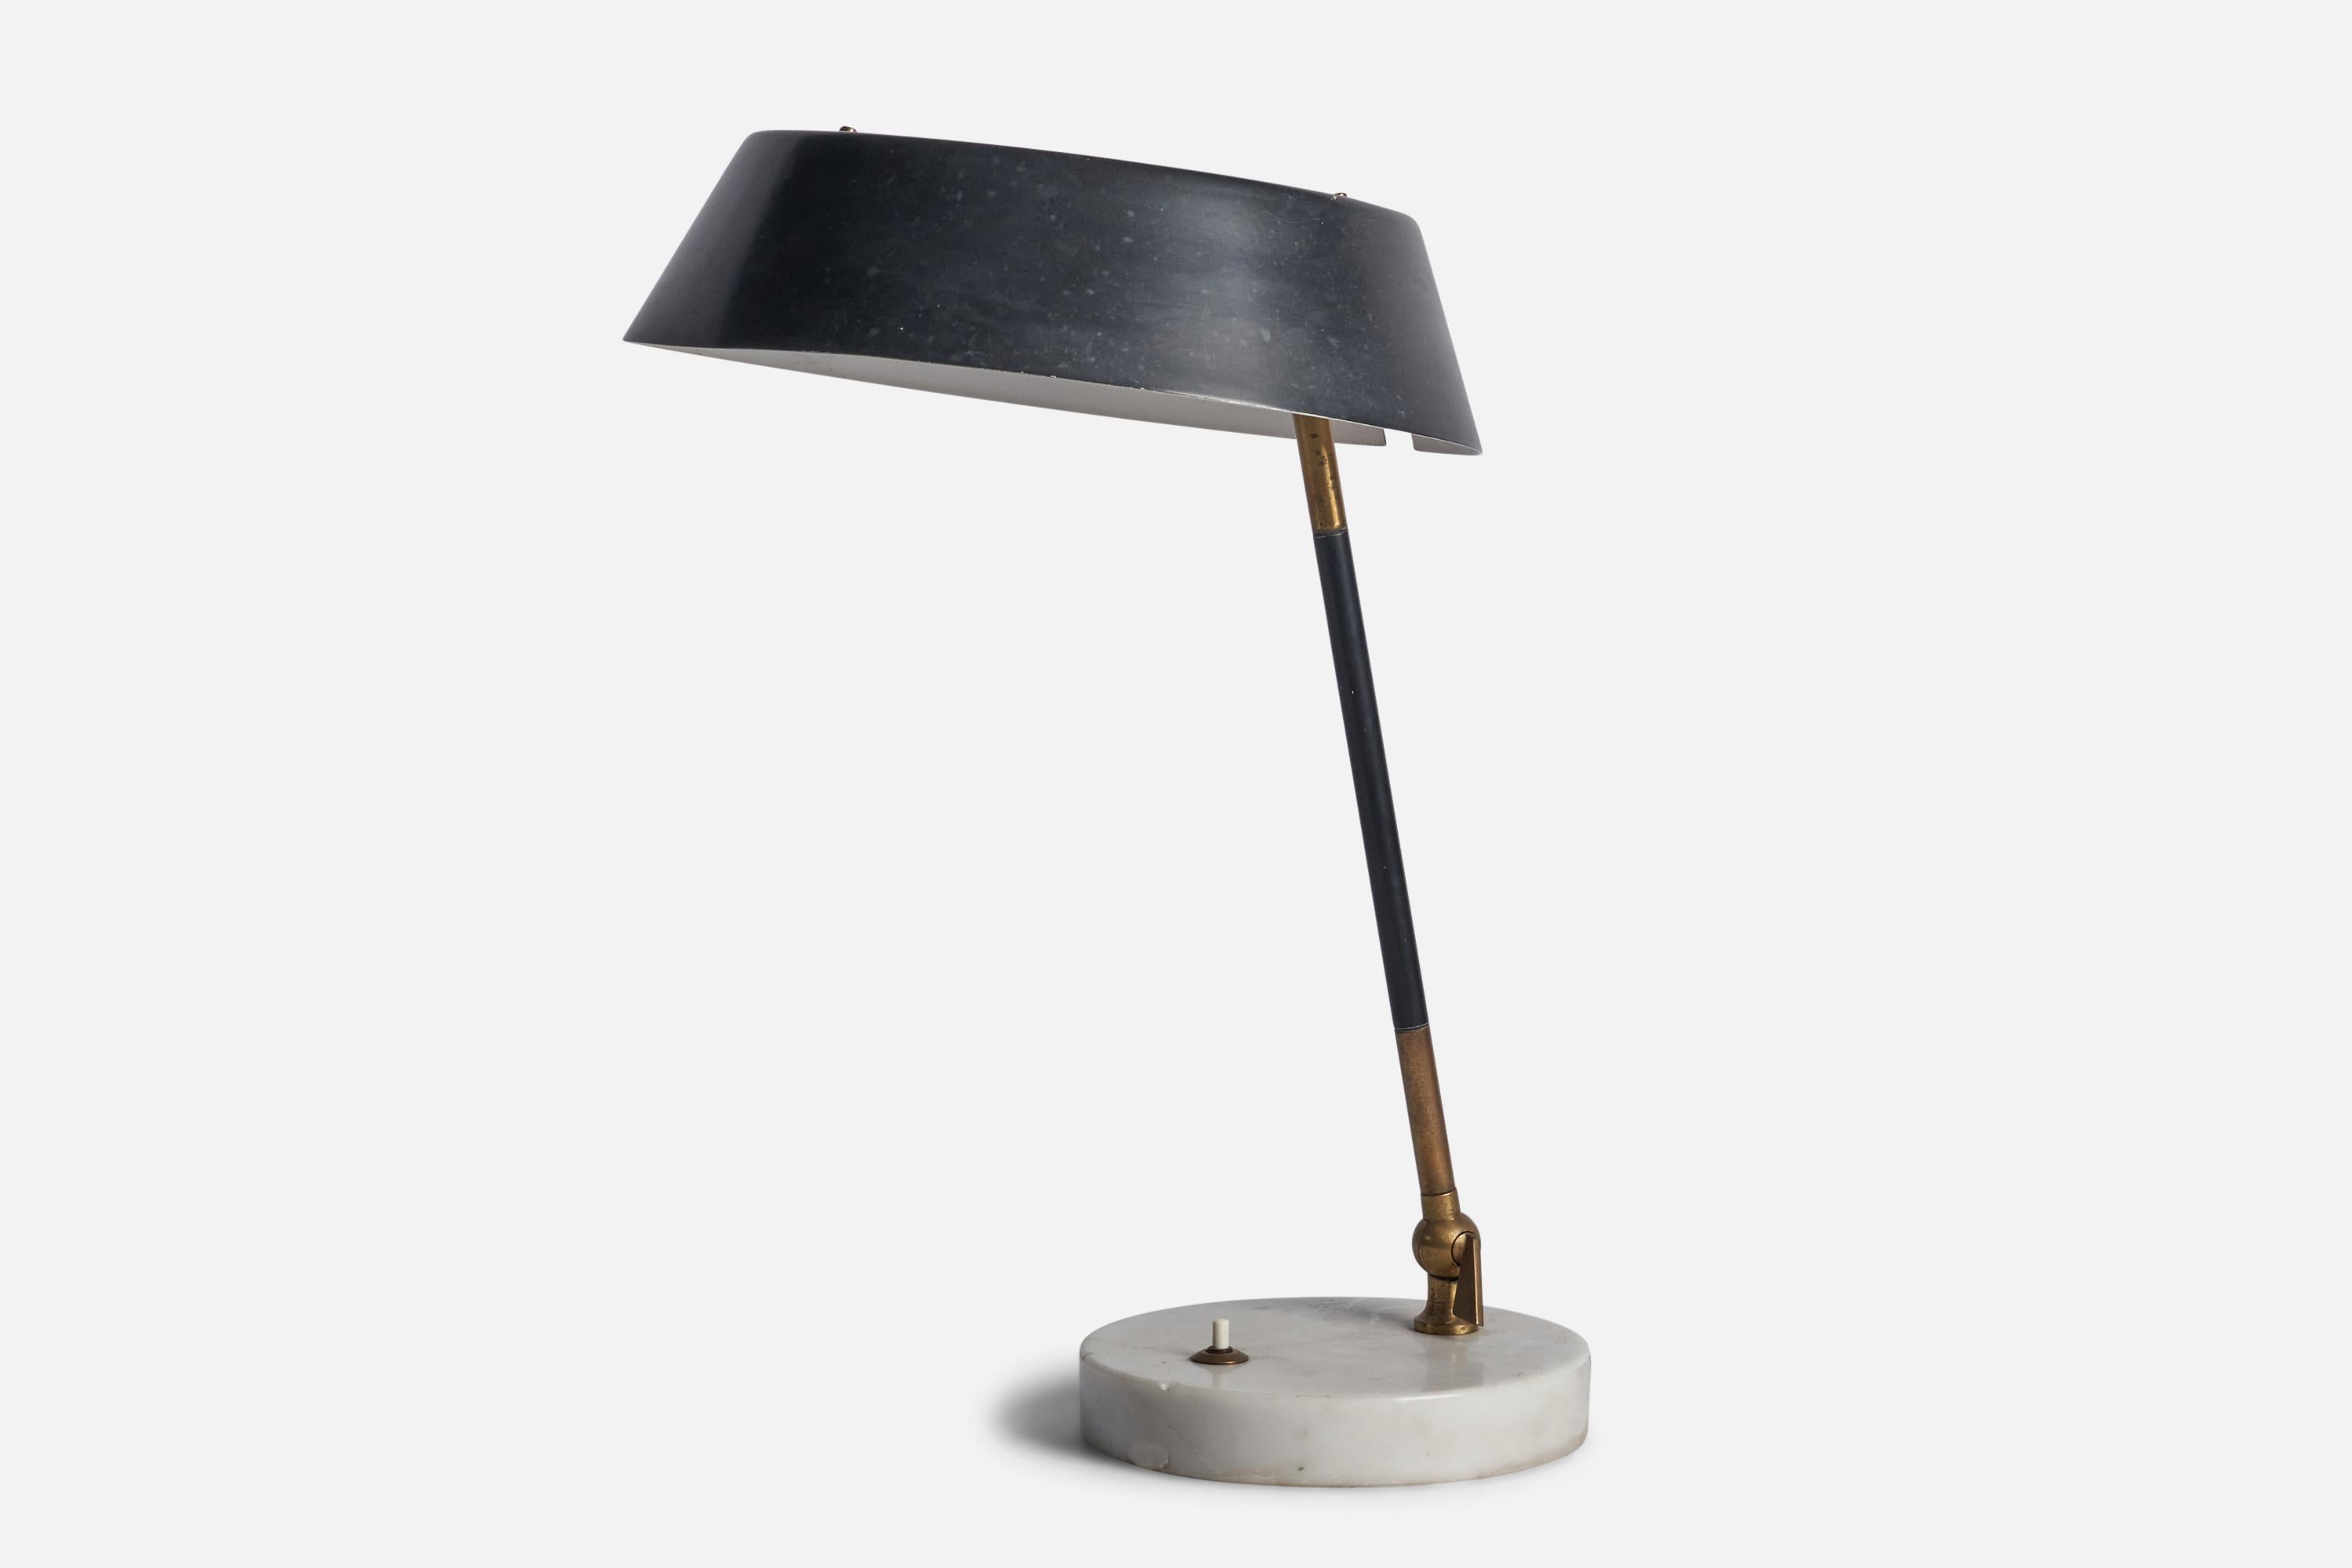 A brass, marble, acrylic and black-lacquered metal table lamp designed and produced by Stilux Milano, Italy, 1950s.

Overall Dimensions (inches): 16.75” H x 11.5” W x 16” D
Bulb Specifications: E-14 Bulb
Number of Sockets: 2
All lighting will be